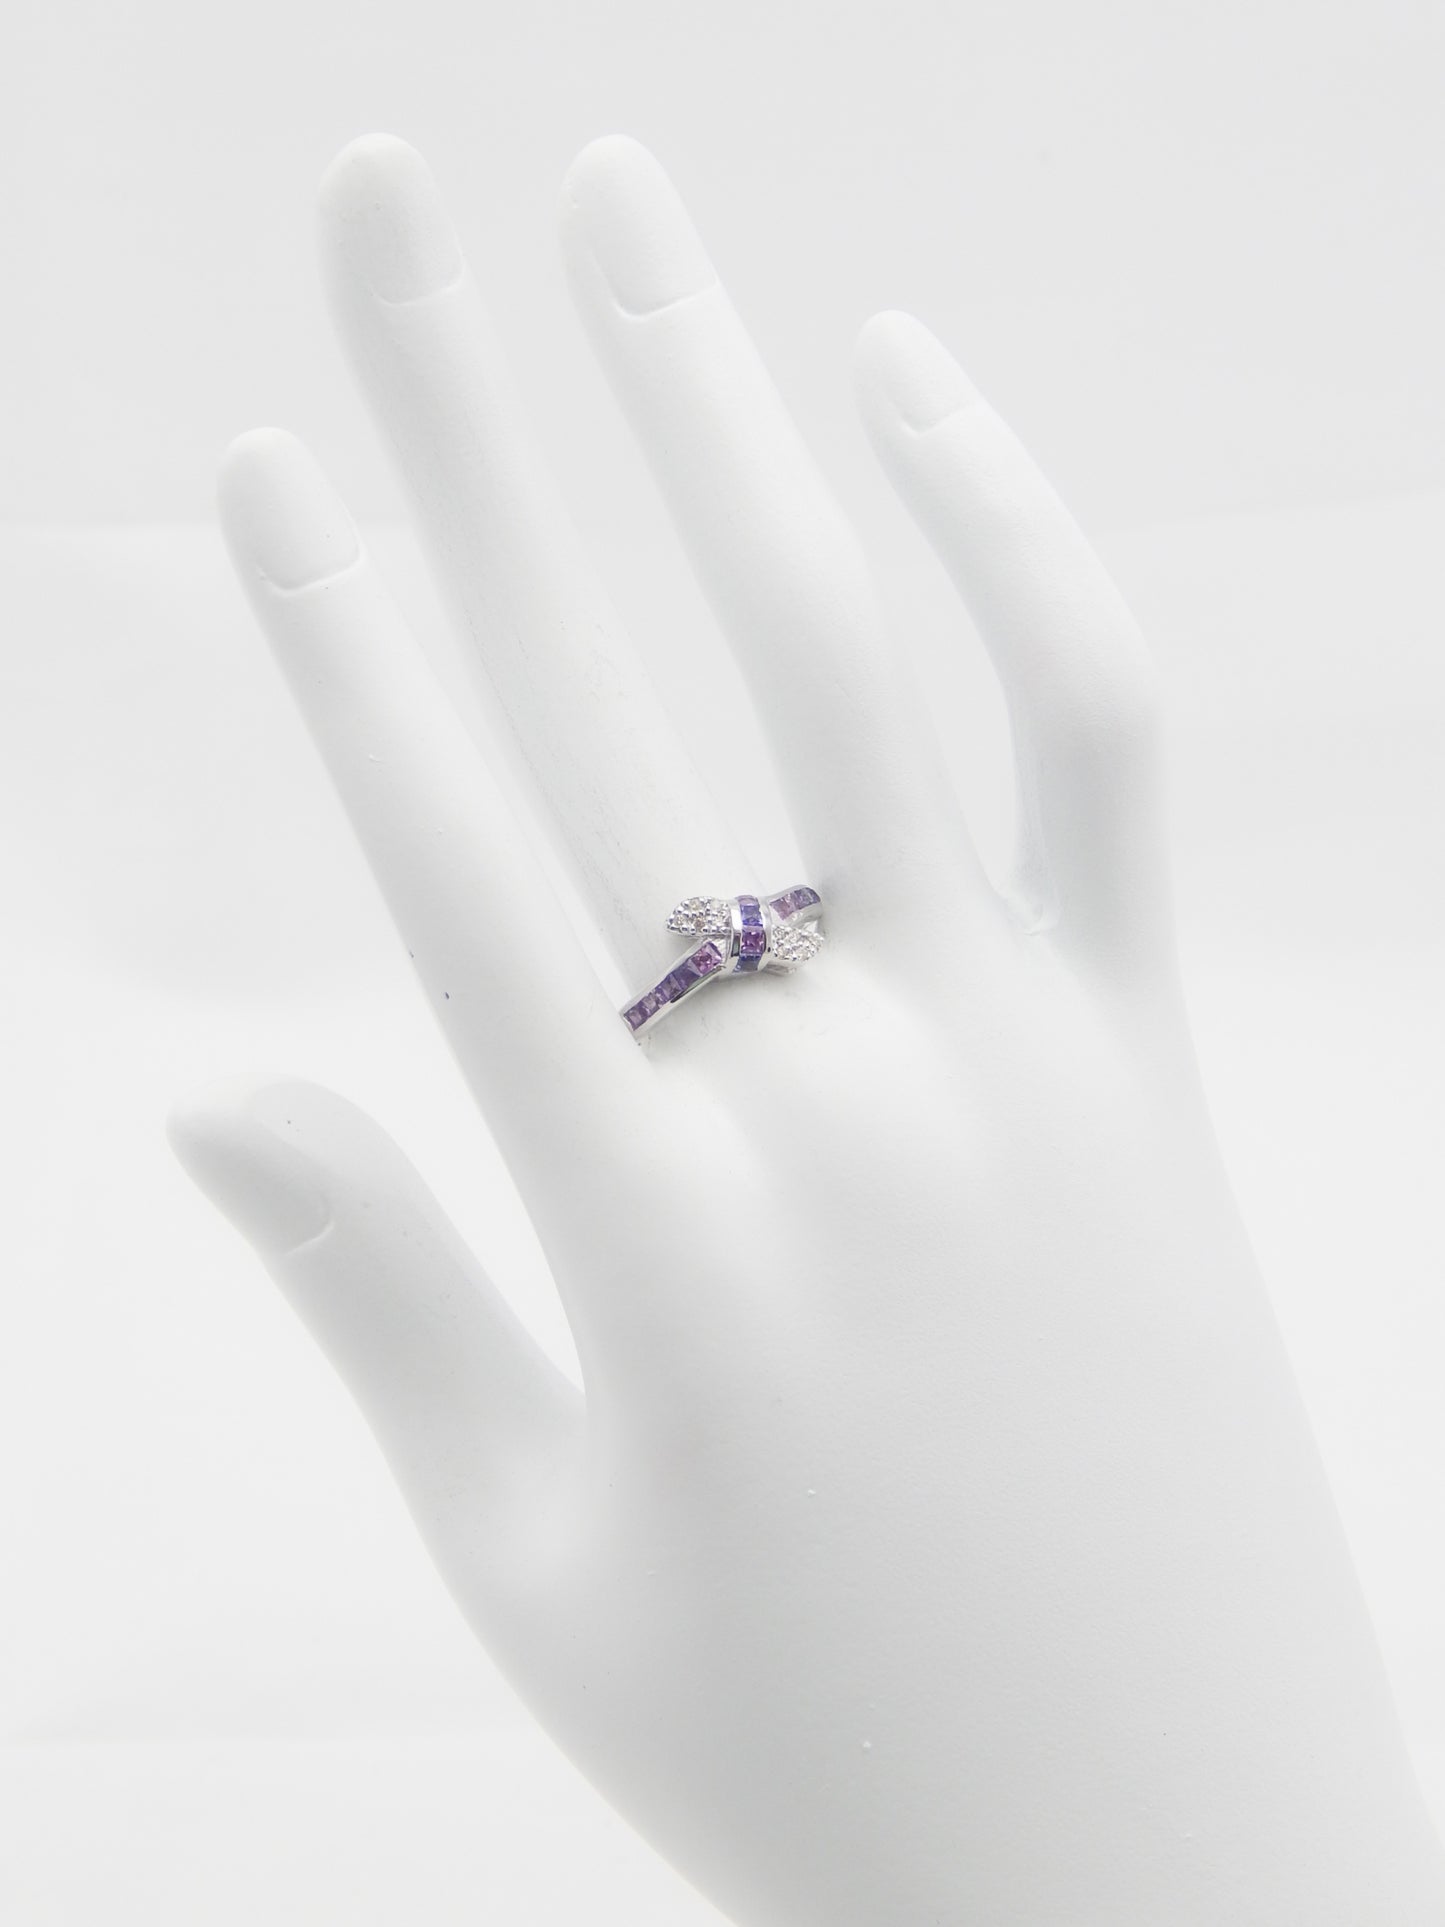 Genuine Pink and Purple Sapphire Love Knot Ring in 925 Sterling Silver